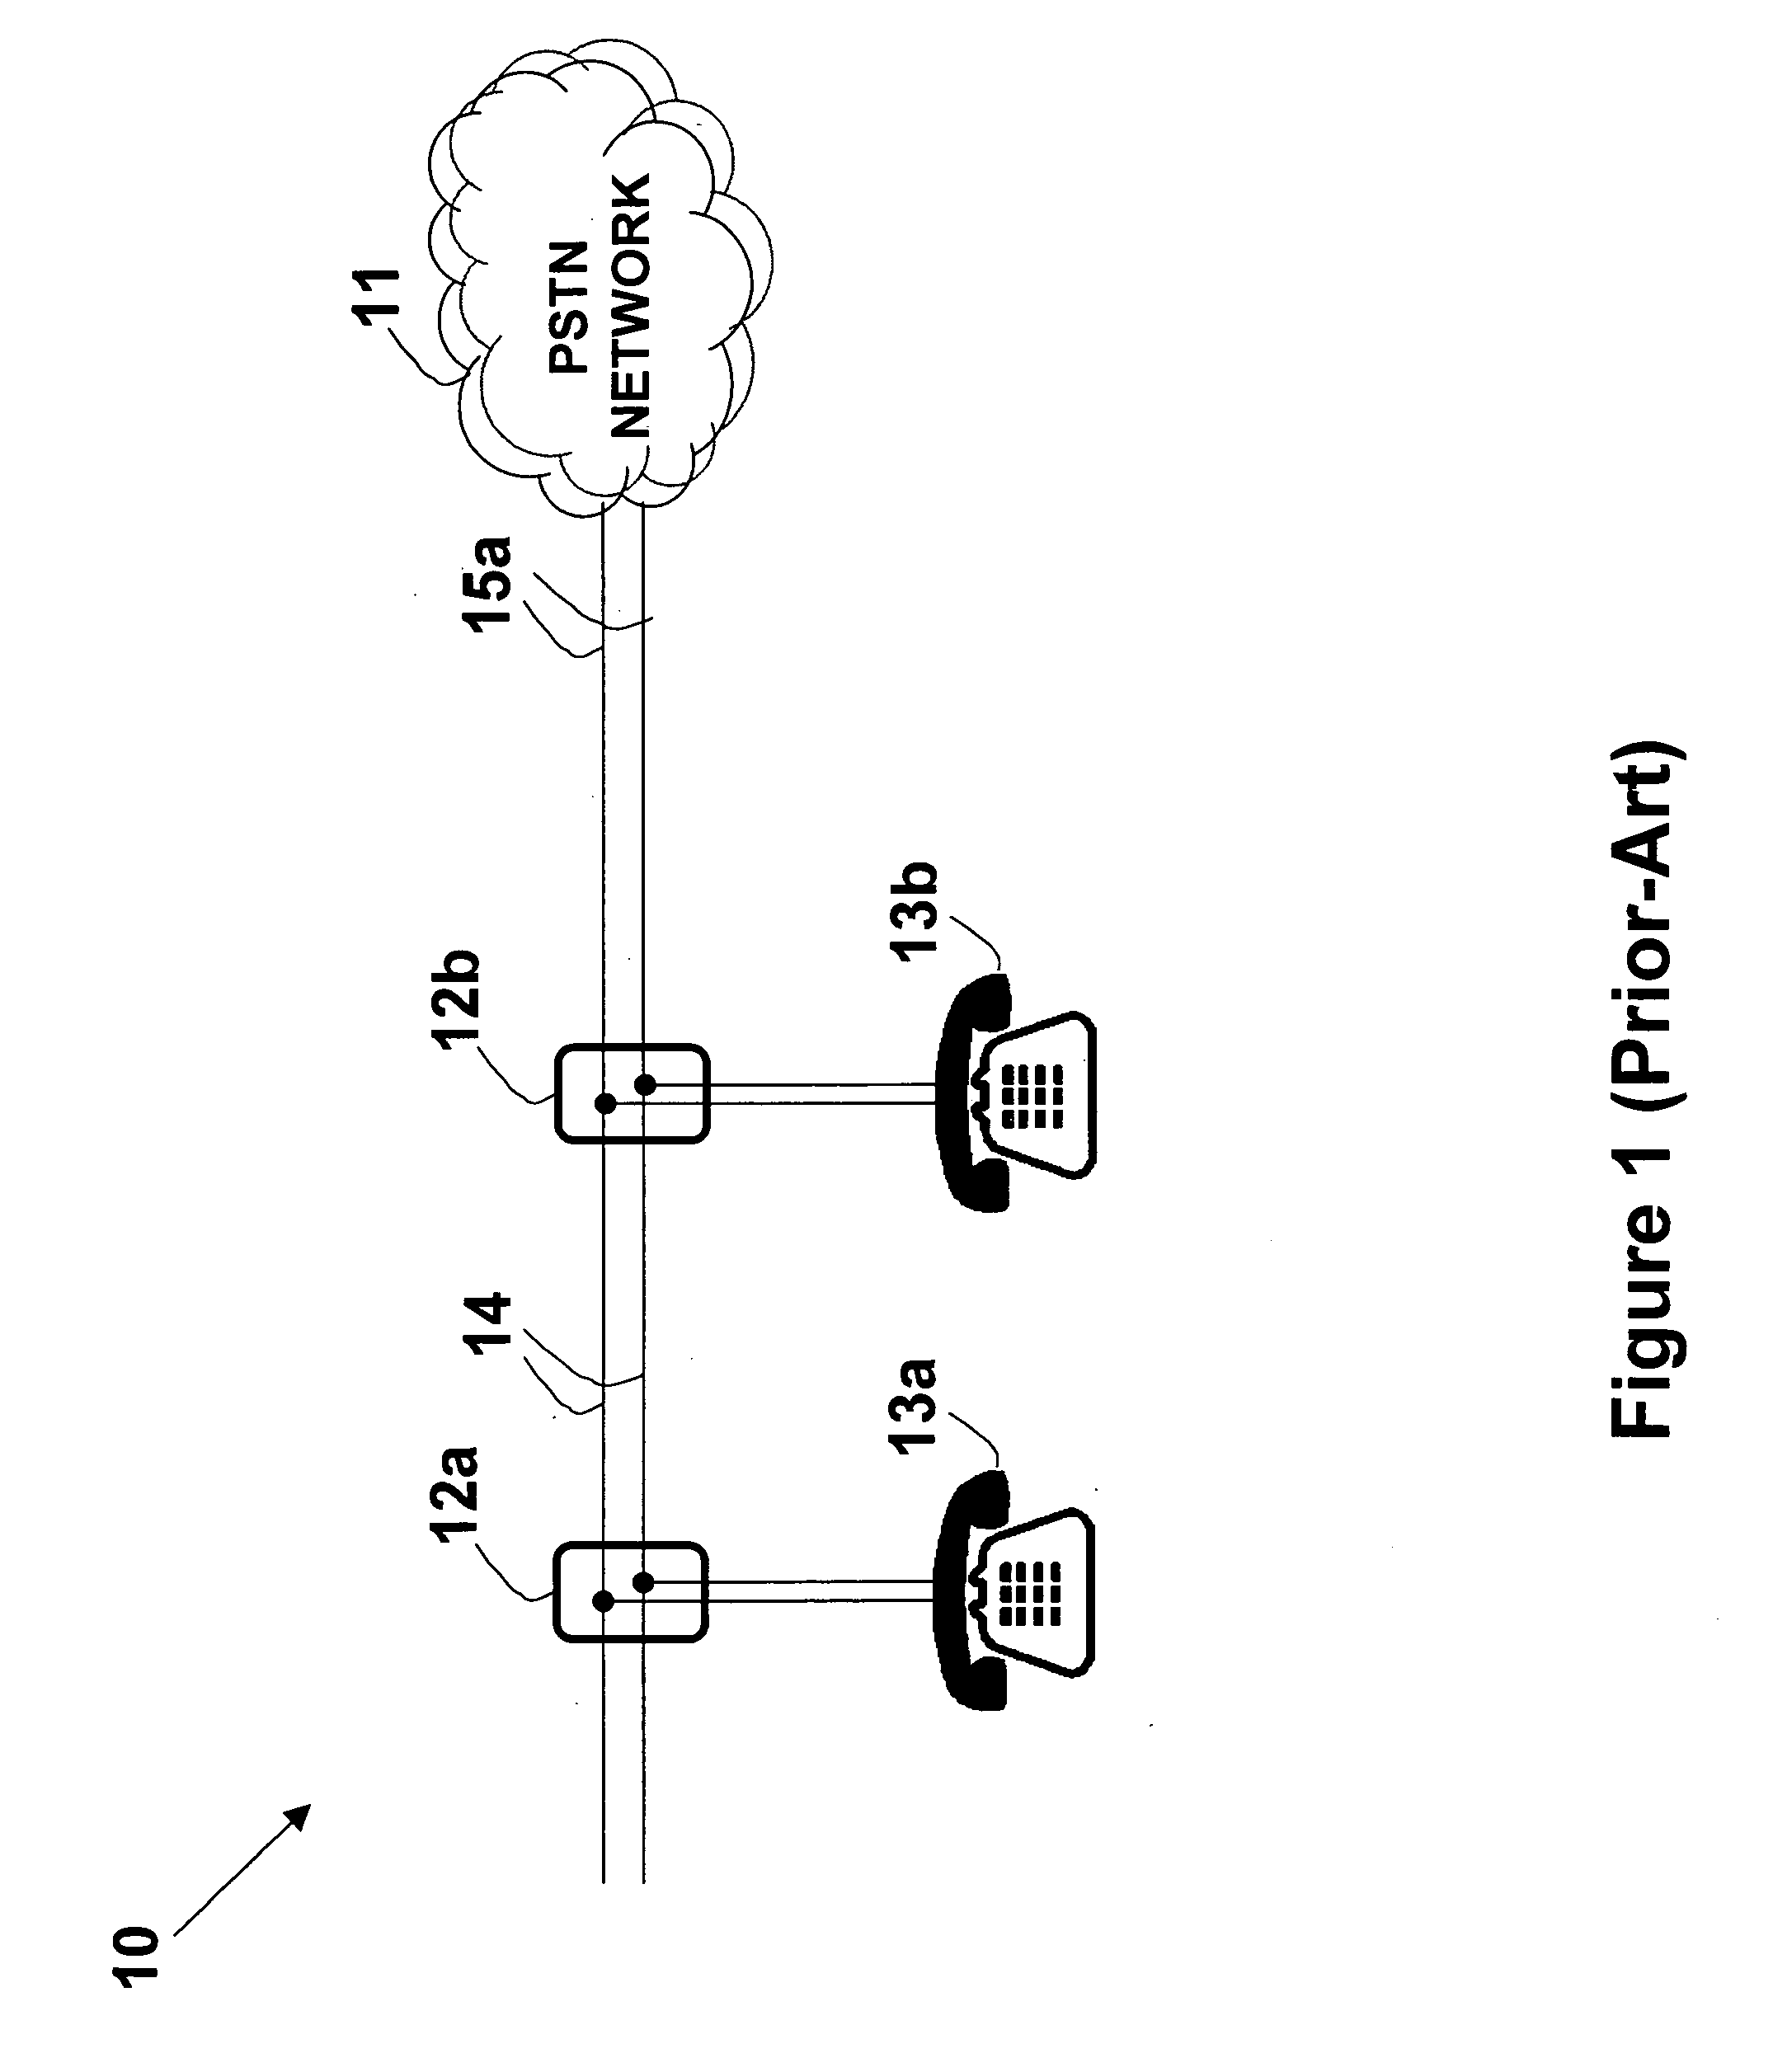 Telephone system having multiple distinct sources and accessories therefor